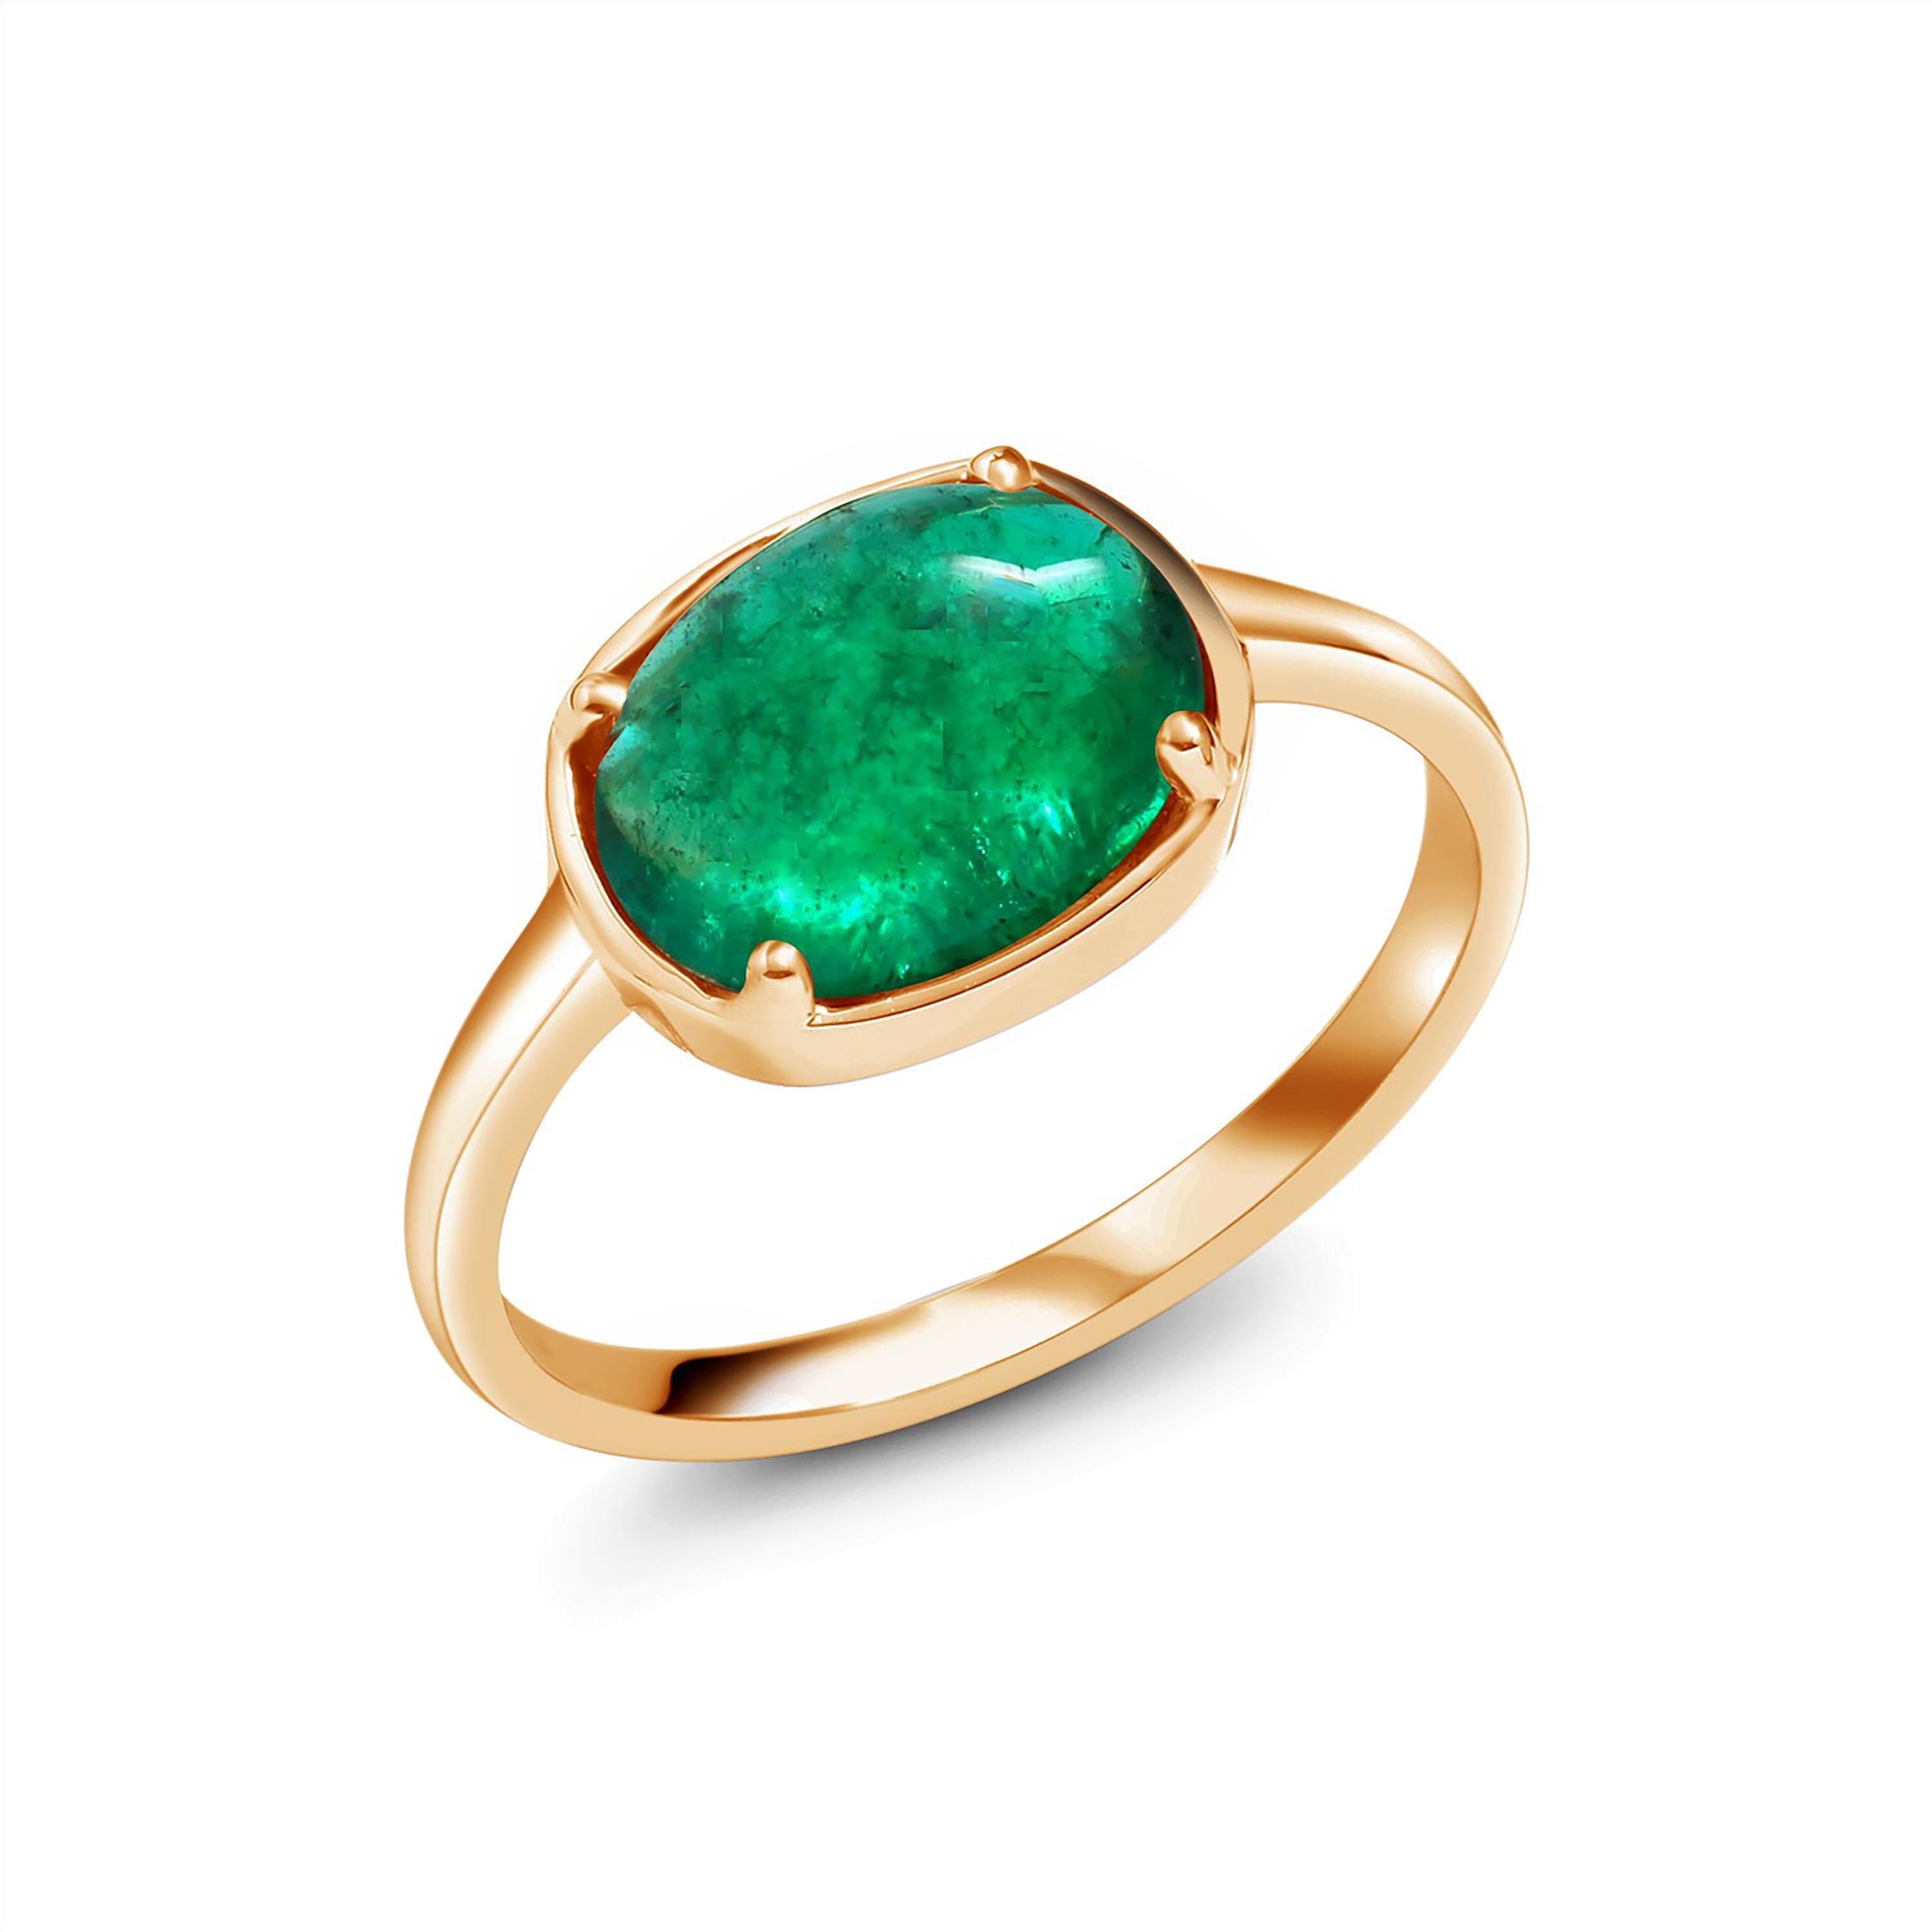 Oval Cut Cabochon Emerald Solitaire Rose Gold Ring Weighing 2.40 Carats